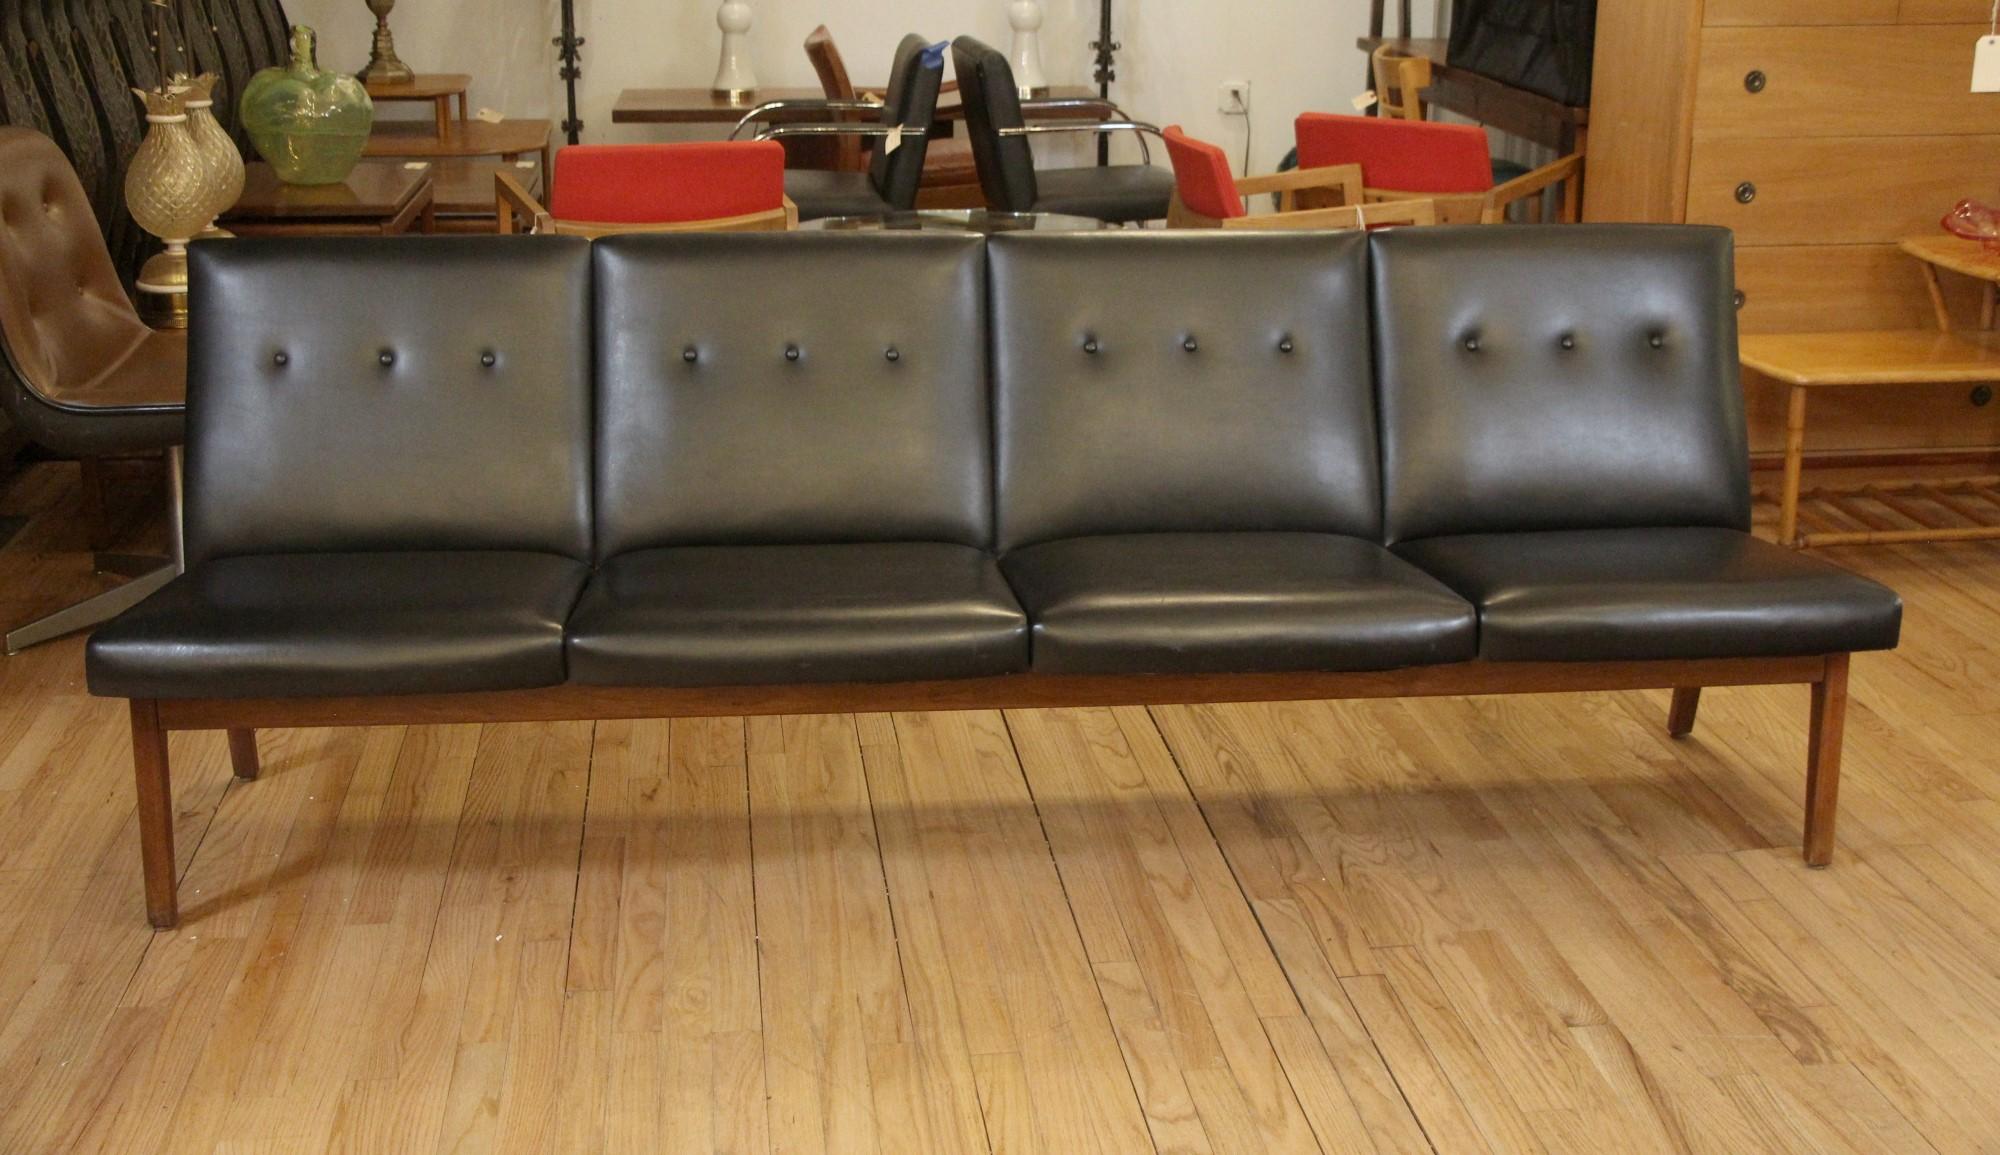 American 4 Seat Black Sofa with Wood Legs, Mid-Century Modern Style with Buttons